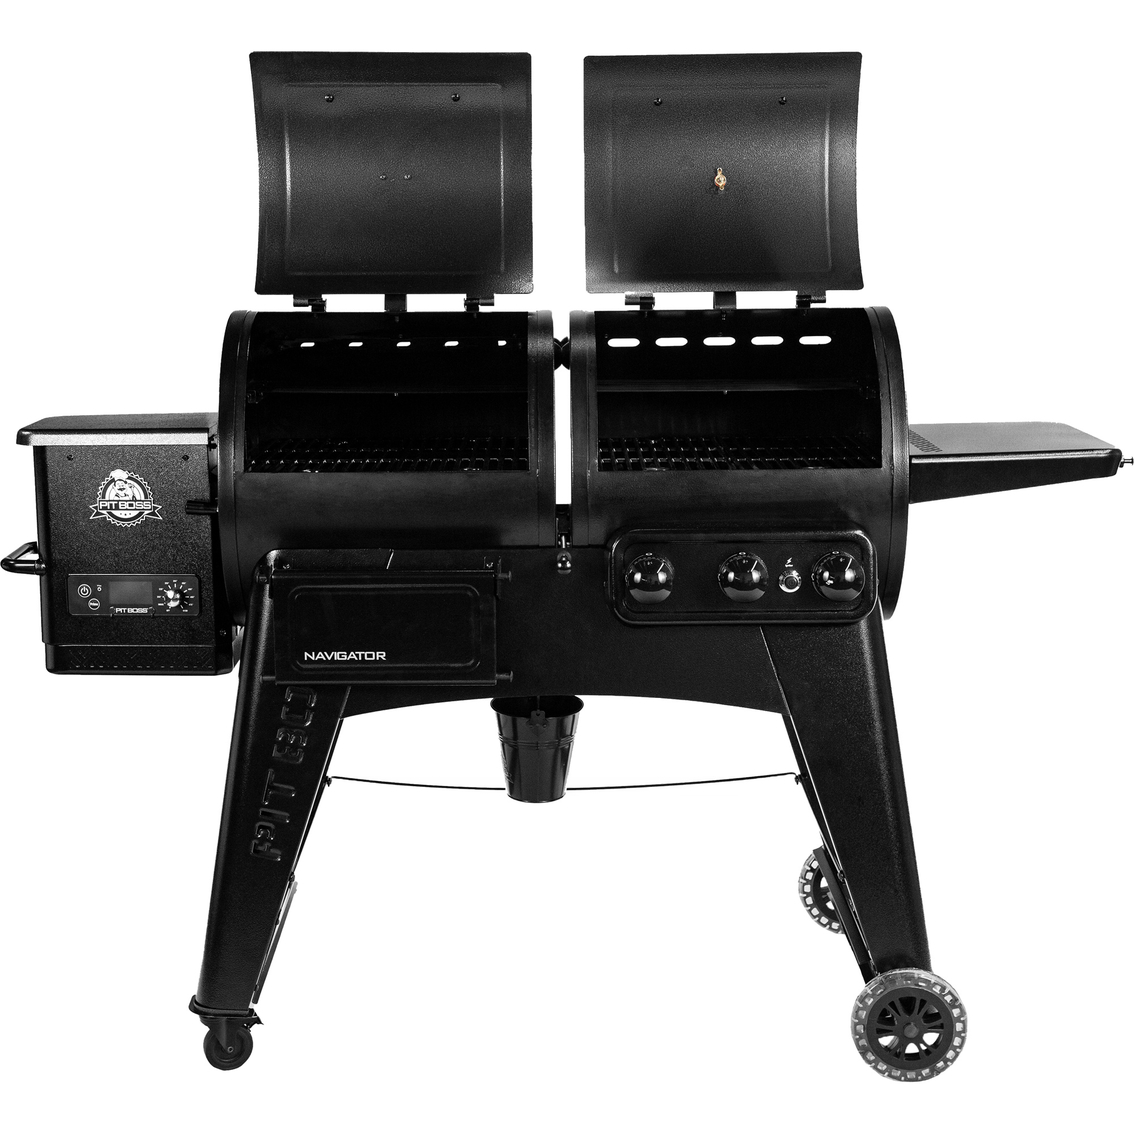 Pit Boss Combo 1230 Wood Pellet Grill - Image 5 of 6